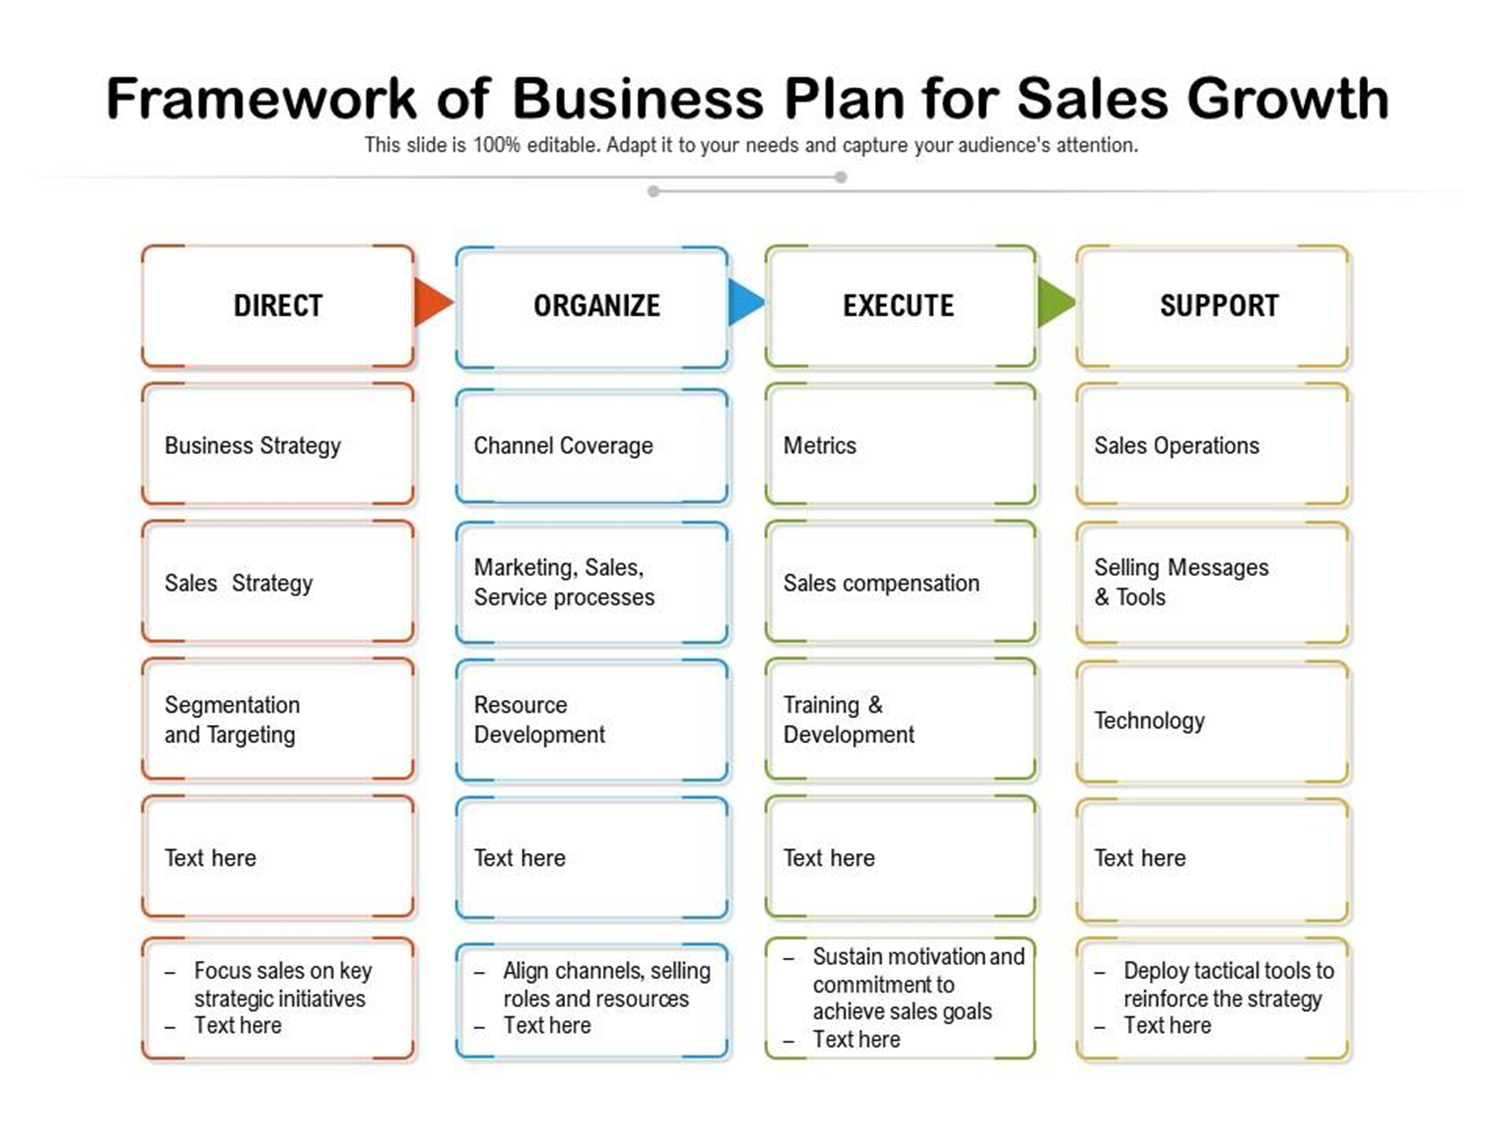 How to Implement a Business Growth Plan